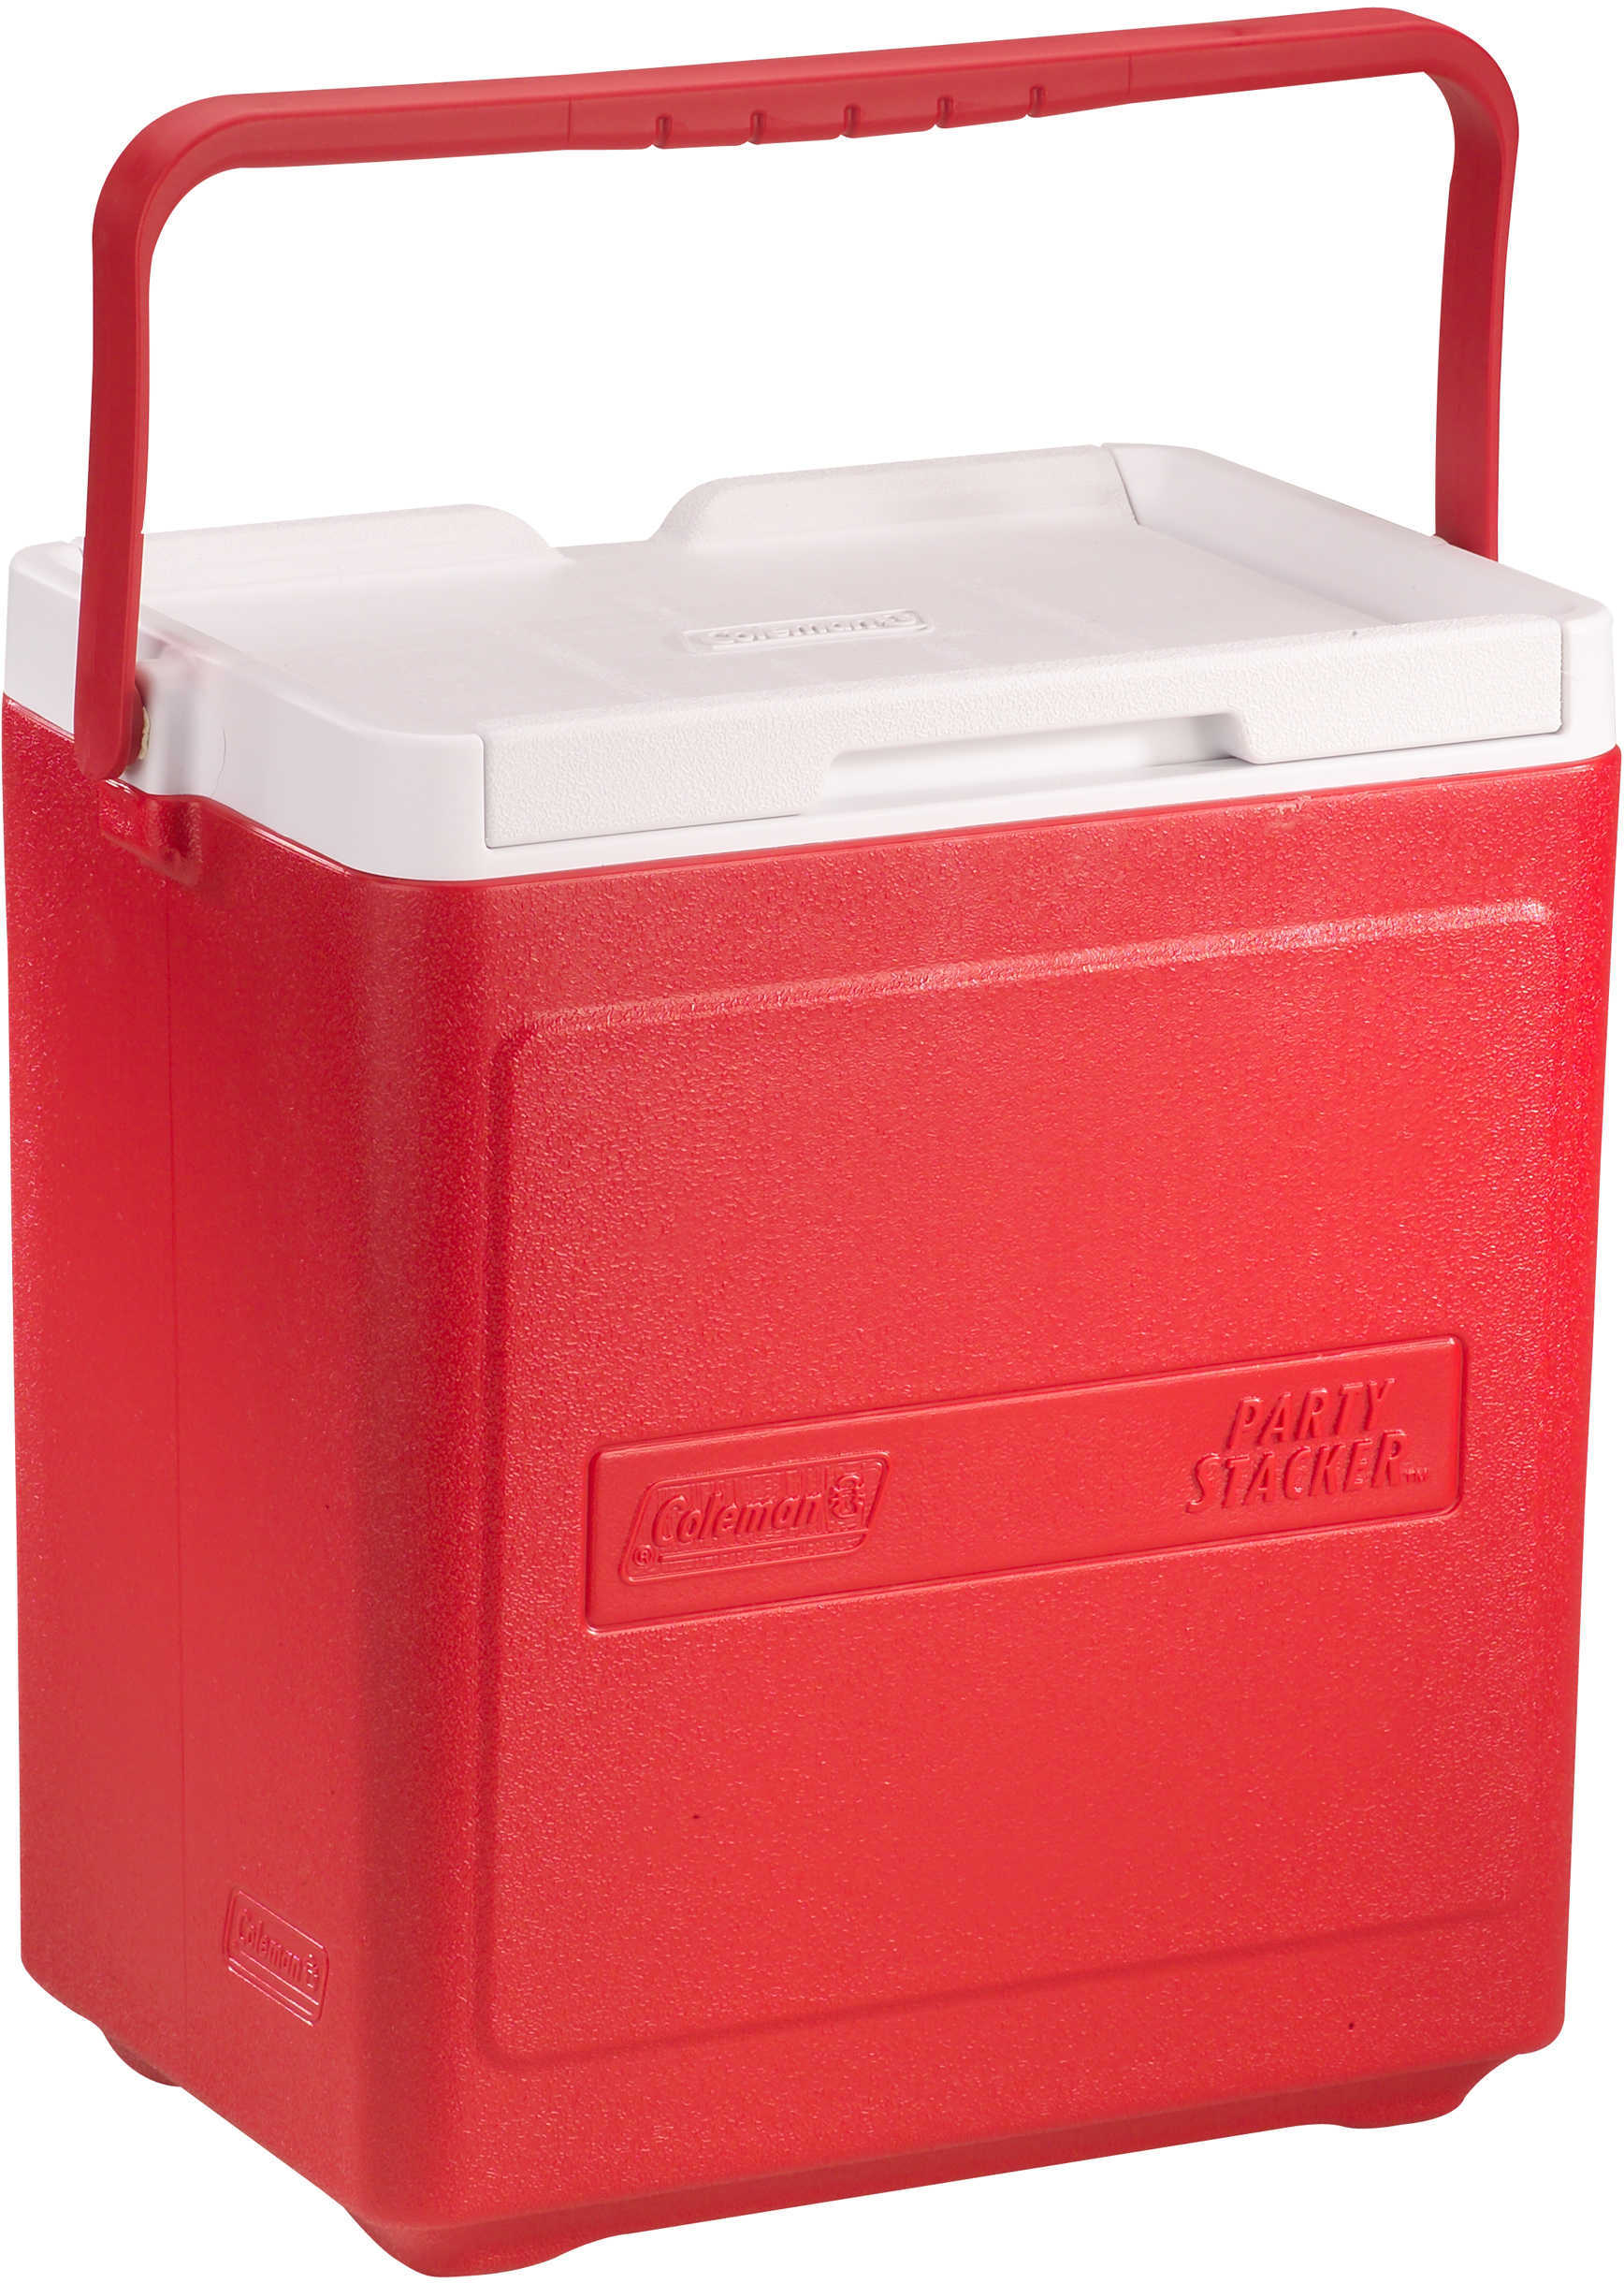 Coleman Cooler, 20 Can Stacker Red Md: 3000000484